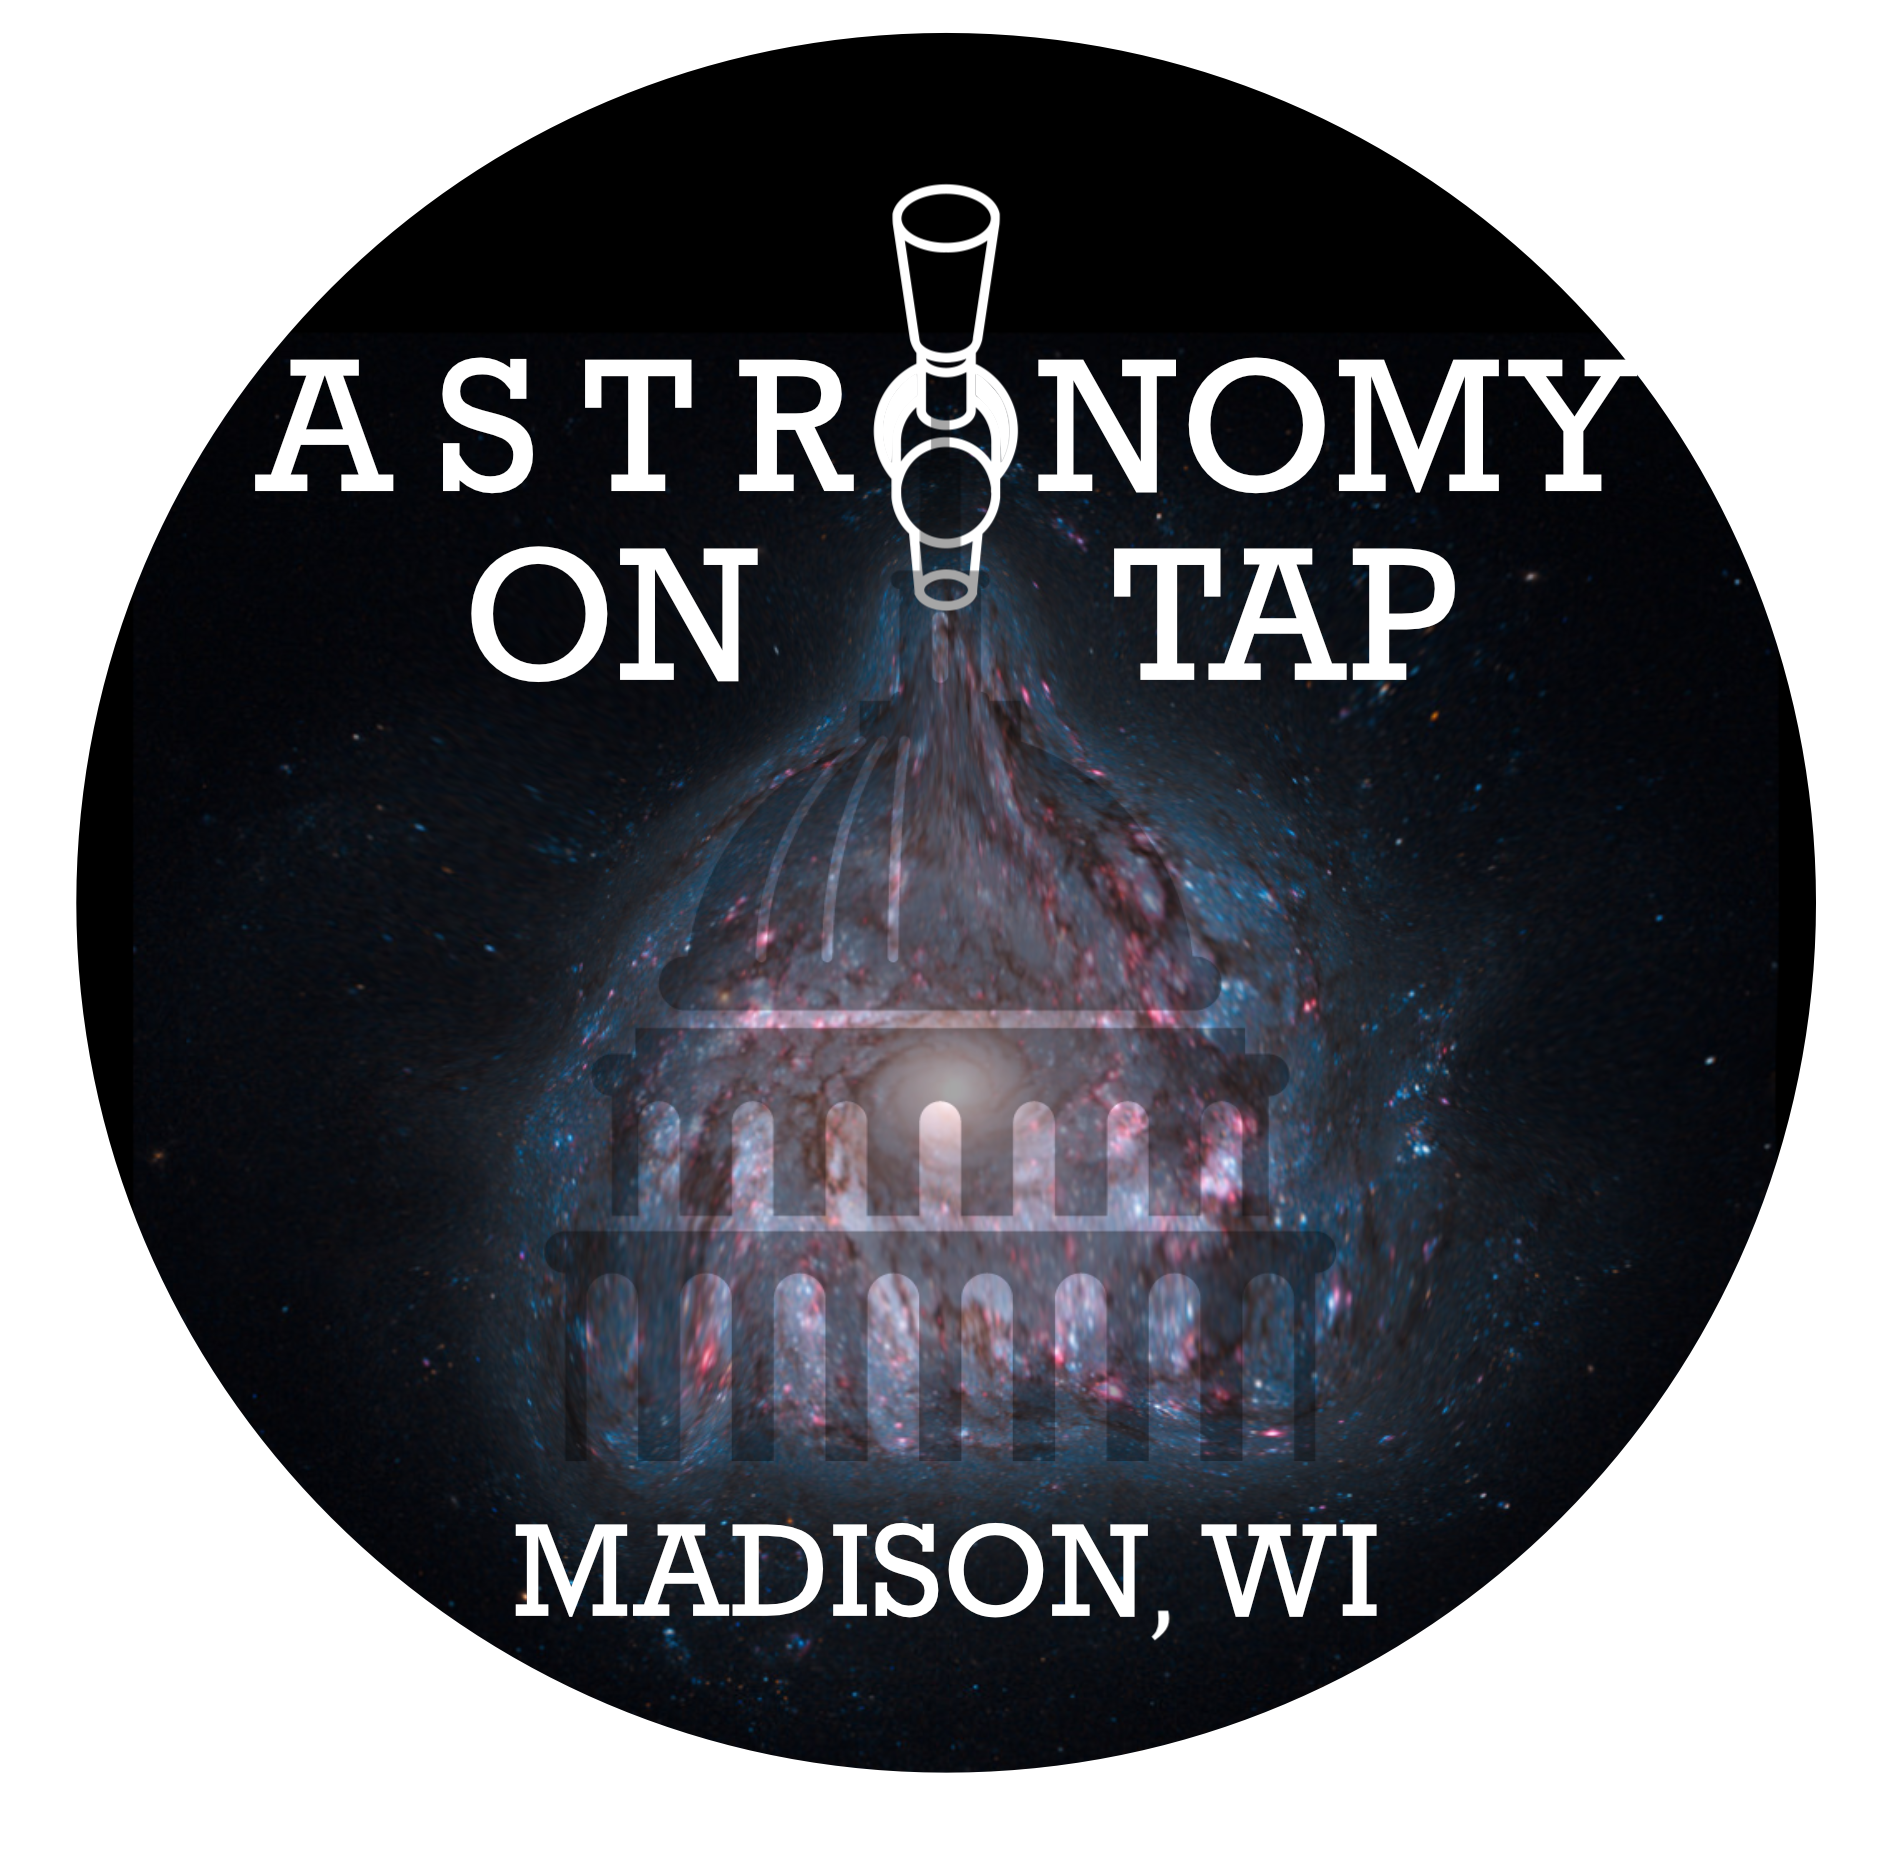 galaxy pouring out of a beer tap handle with text "Astronomy on Tap" above and "madison, wi" below